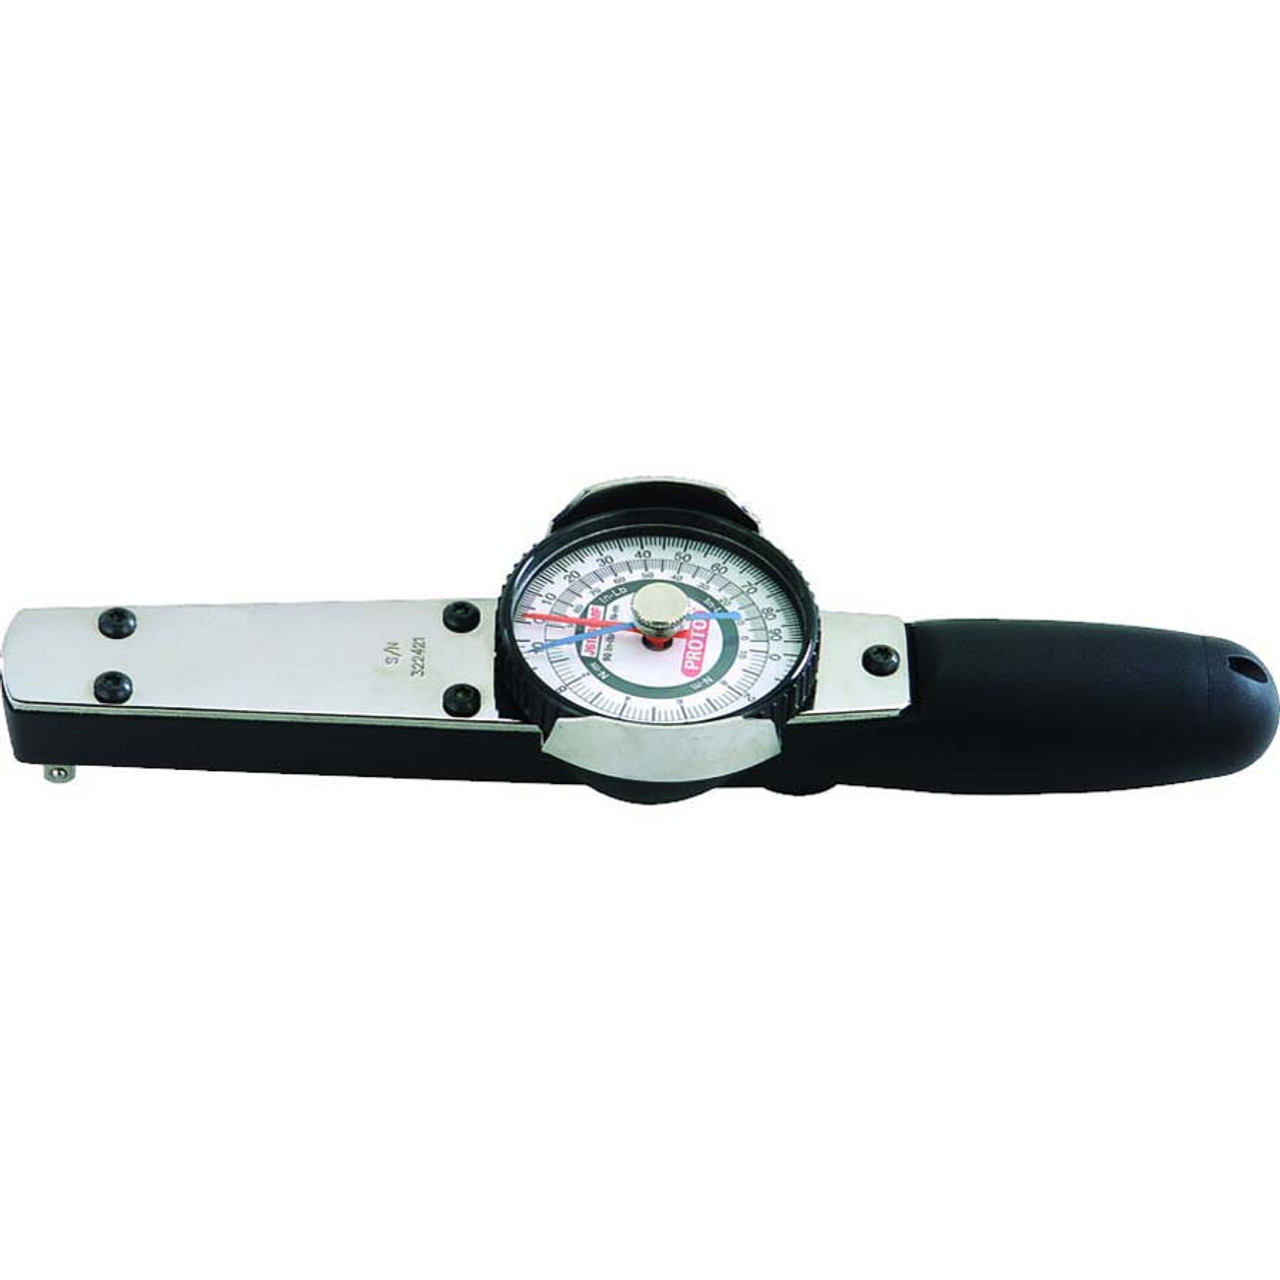 Proto 1/4 Dr 6-30 In Lbs / 7-35 cm kg Proto Dial Torque Wrench - J6168F